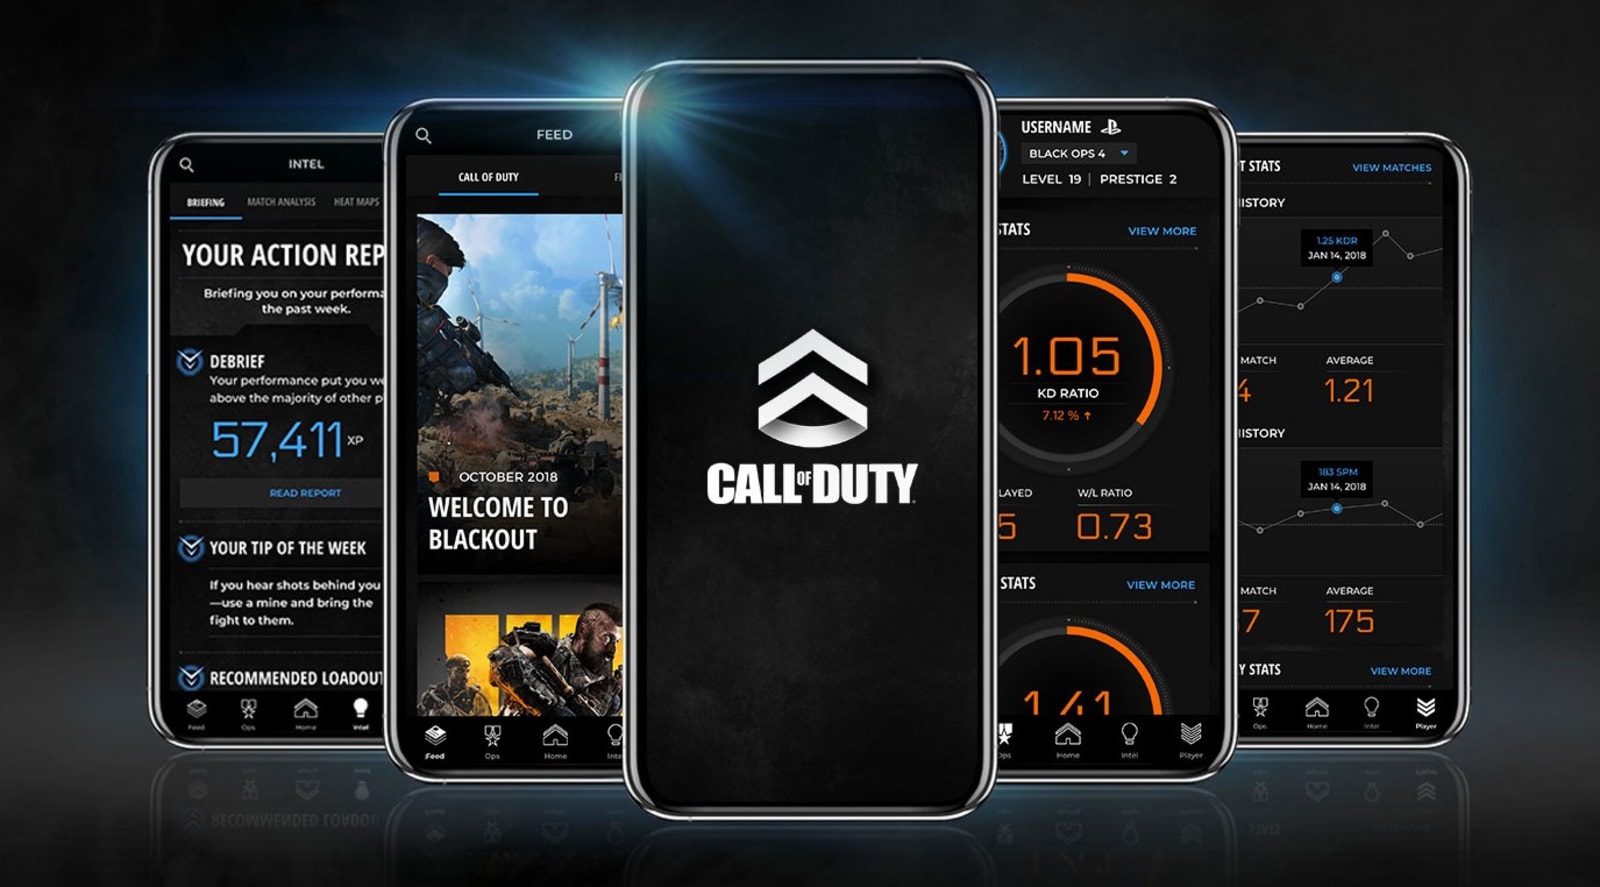 [2020] Free Cod Points & Credits Call Of Duty Mobile App For Android